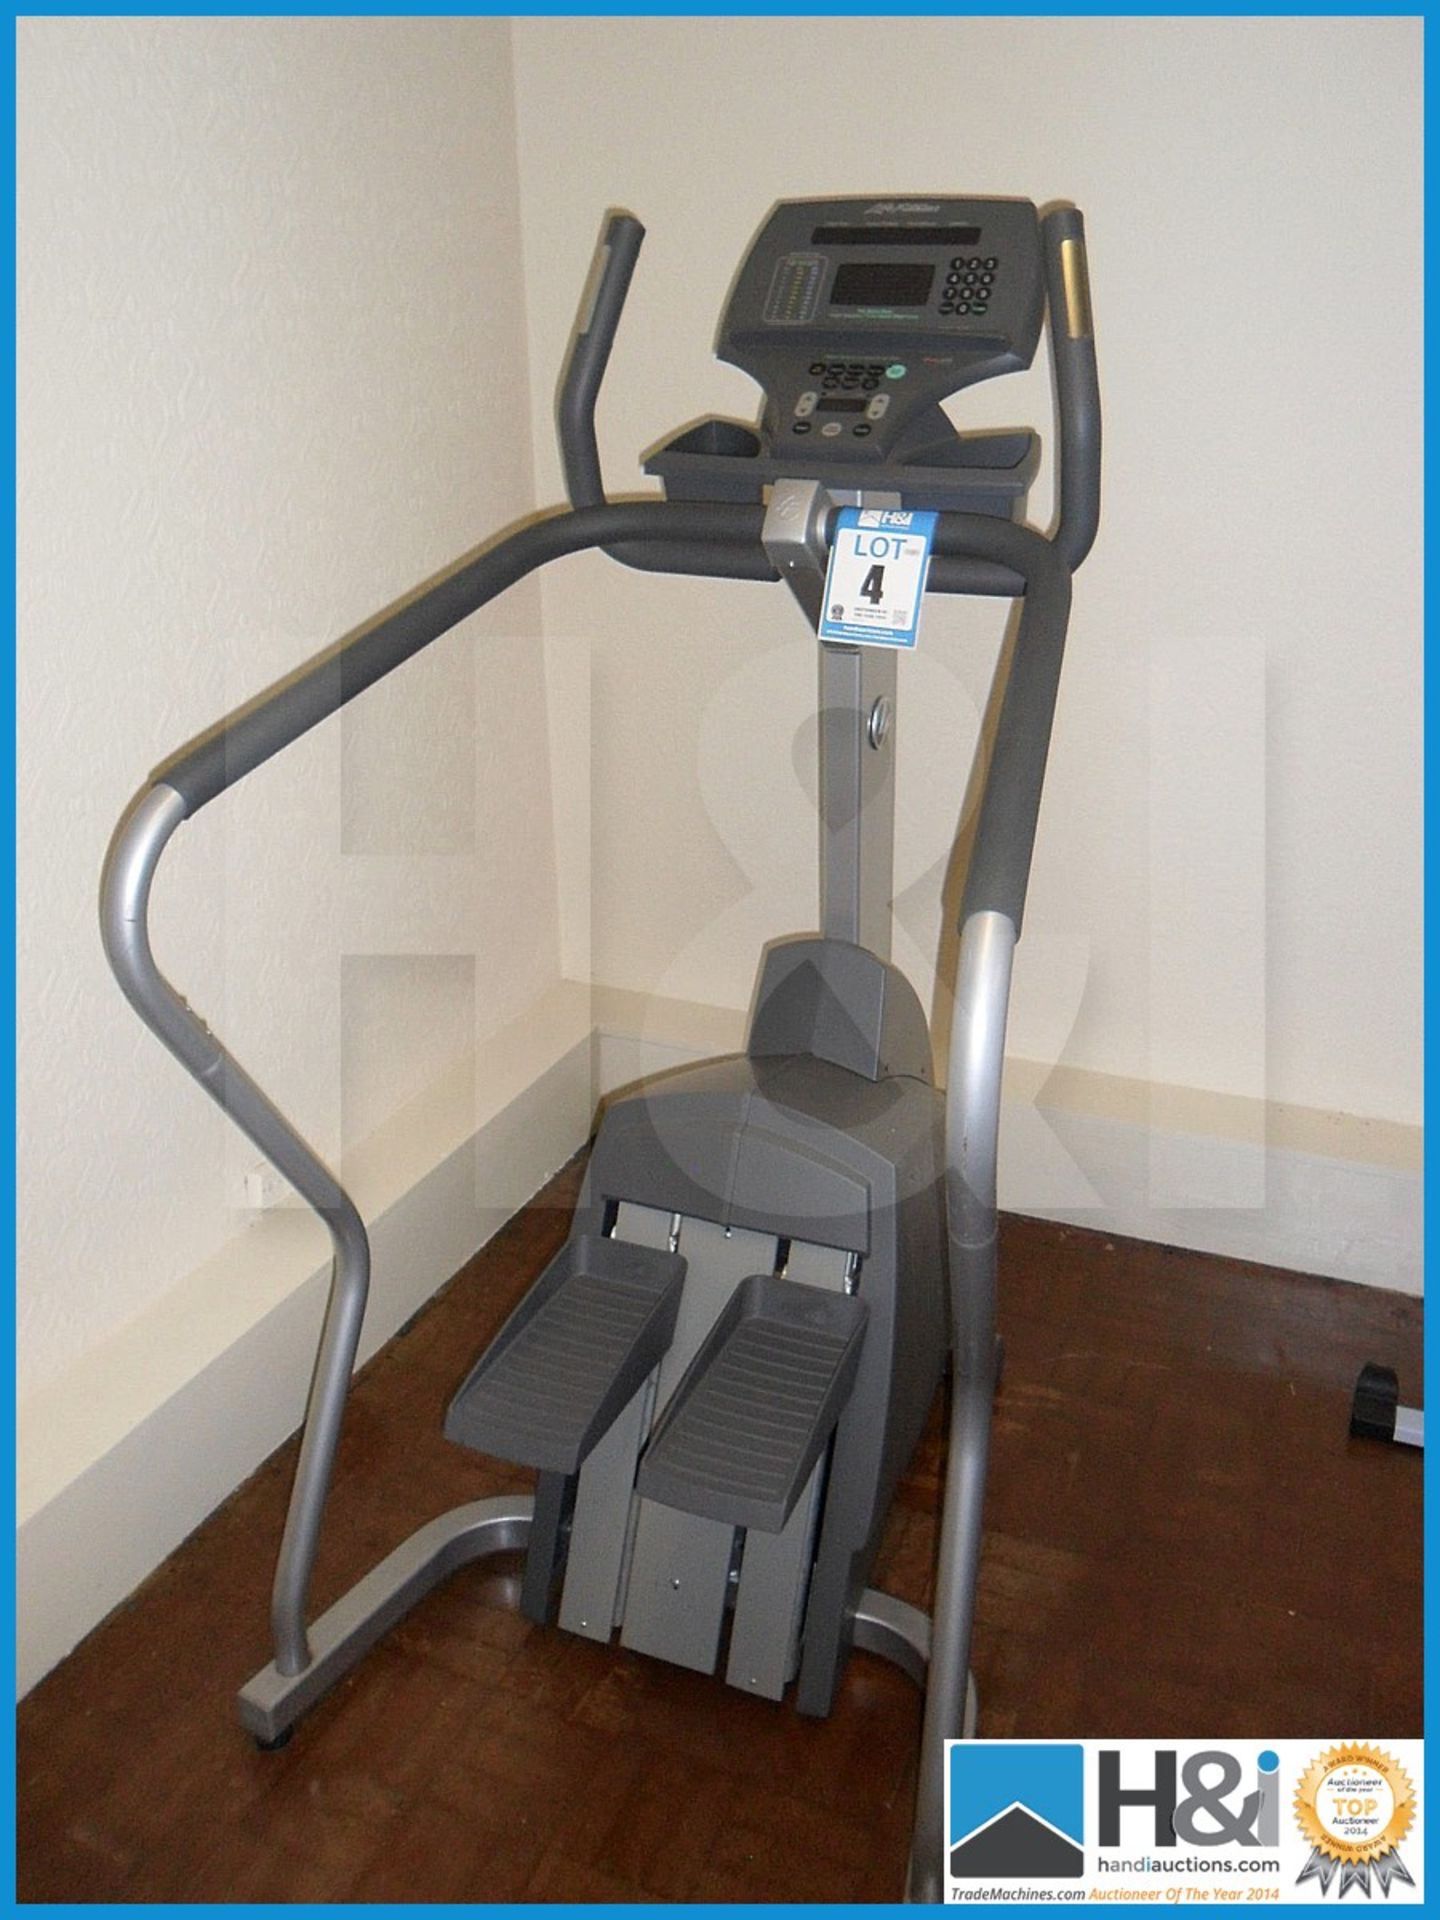 Life Fitness 95Si stair climber. with heart rate monitor. Fully programmable. Presented in excellent